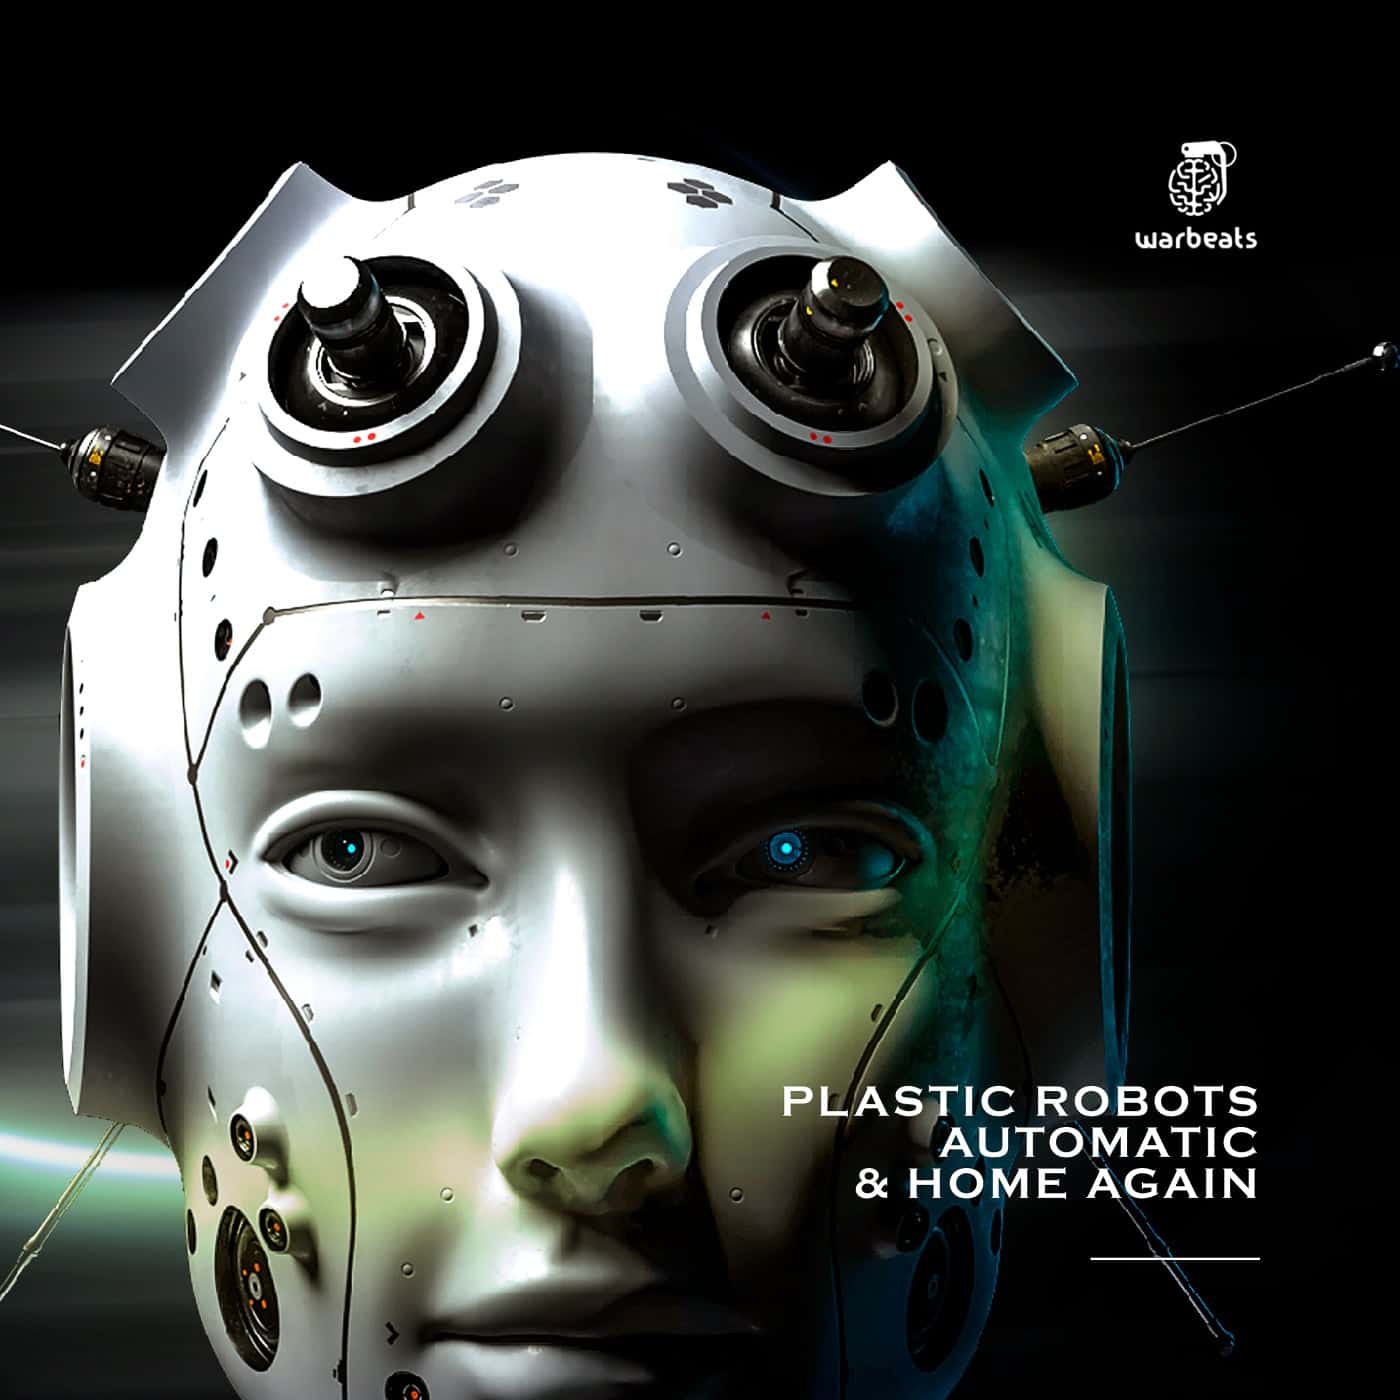 Download Plastic Robots - Automatic & Home Again on Electrobuzz